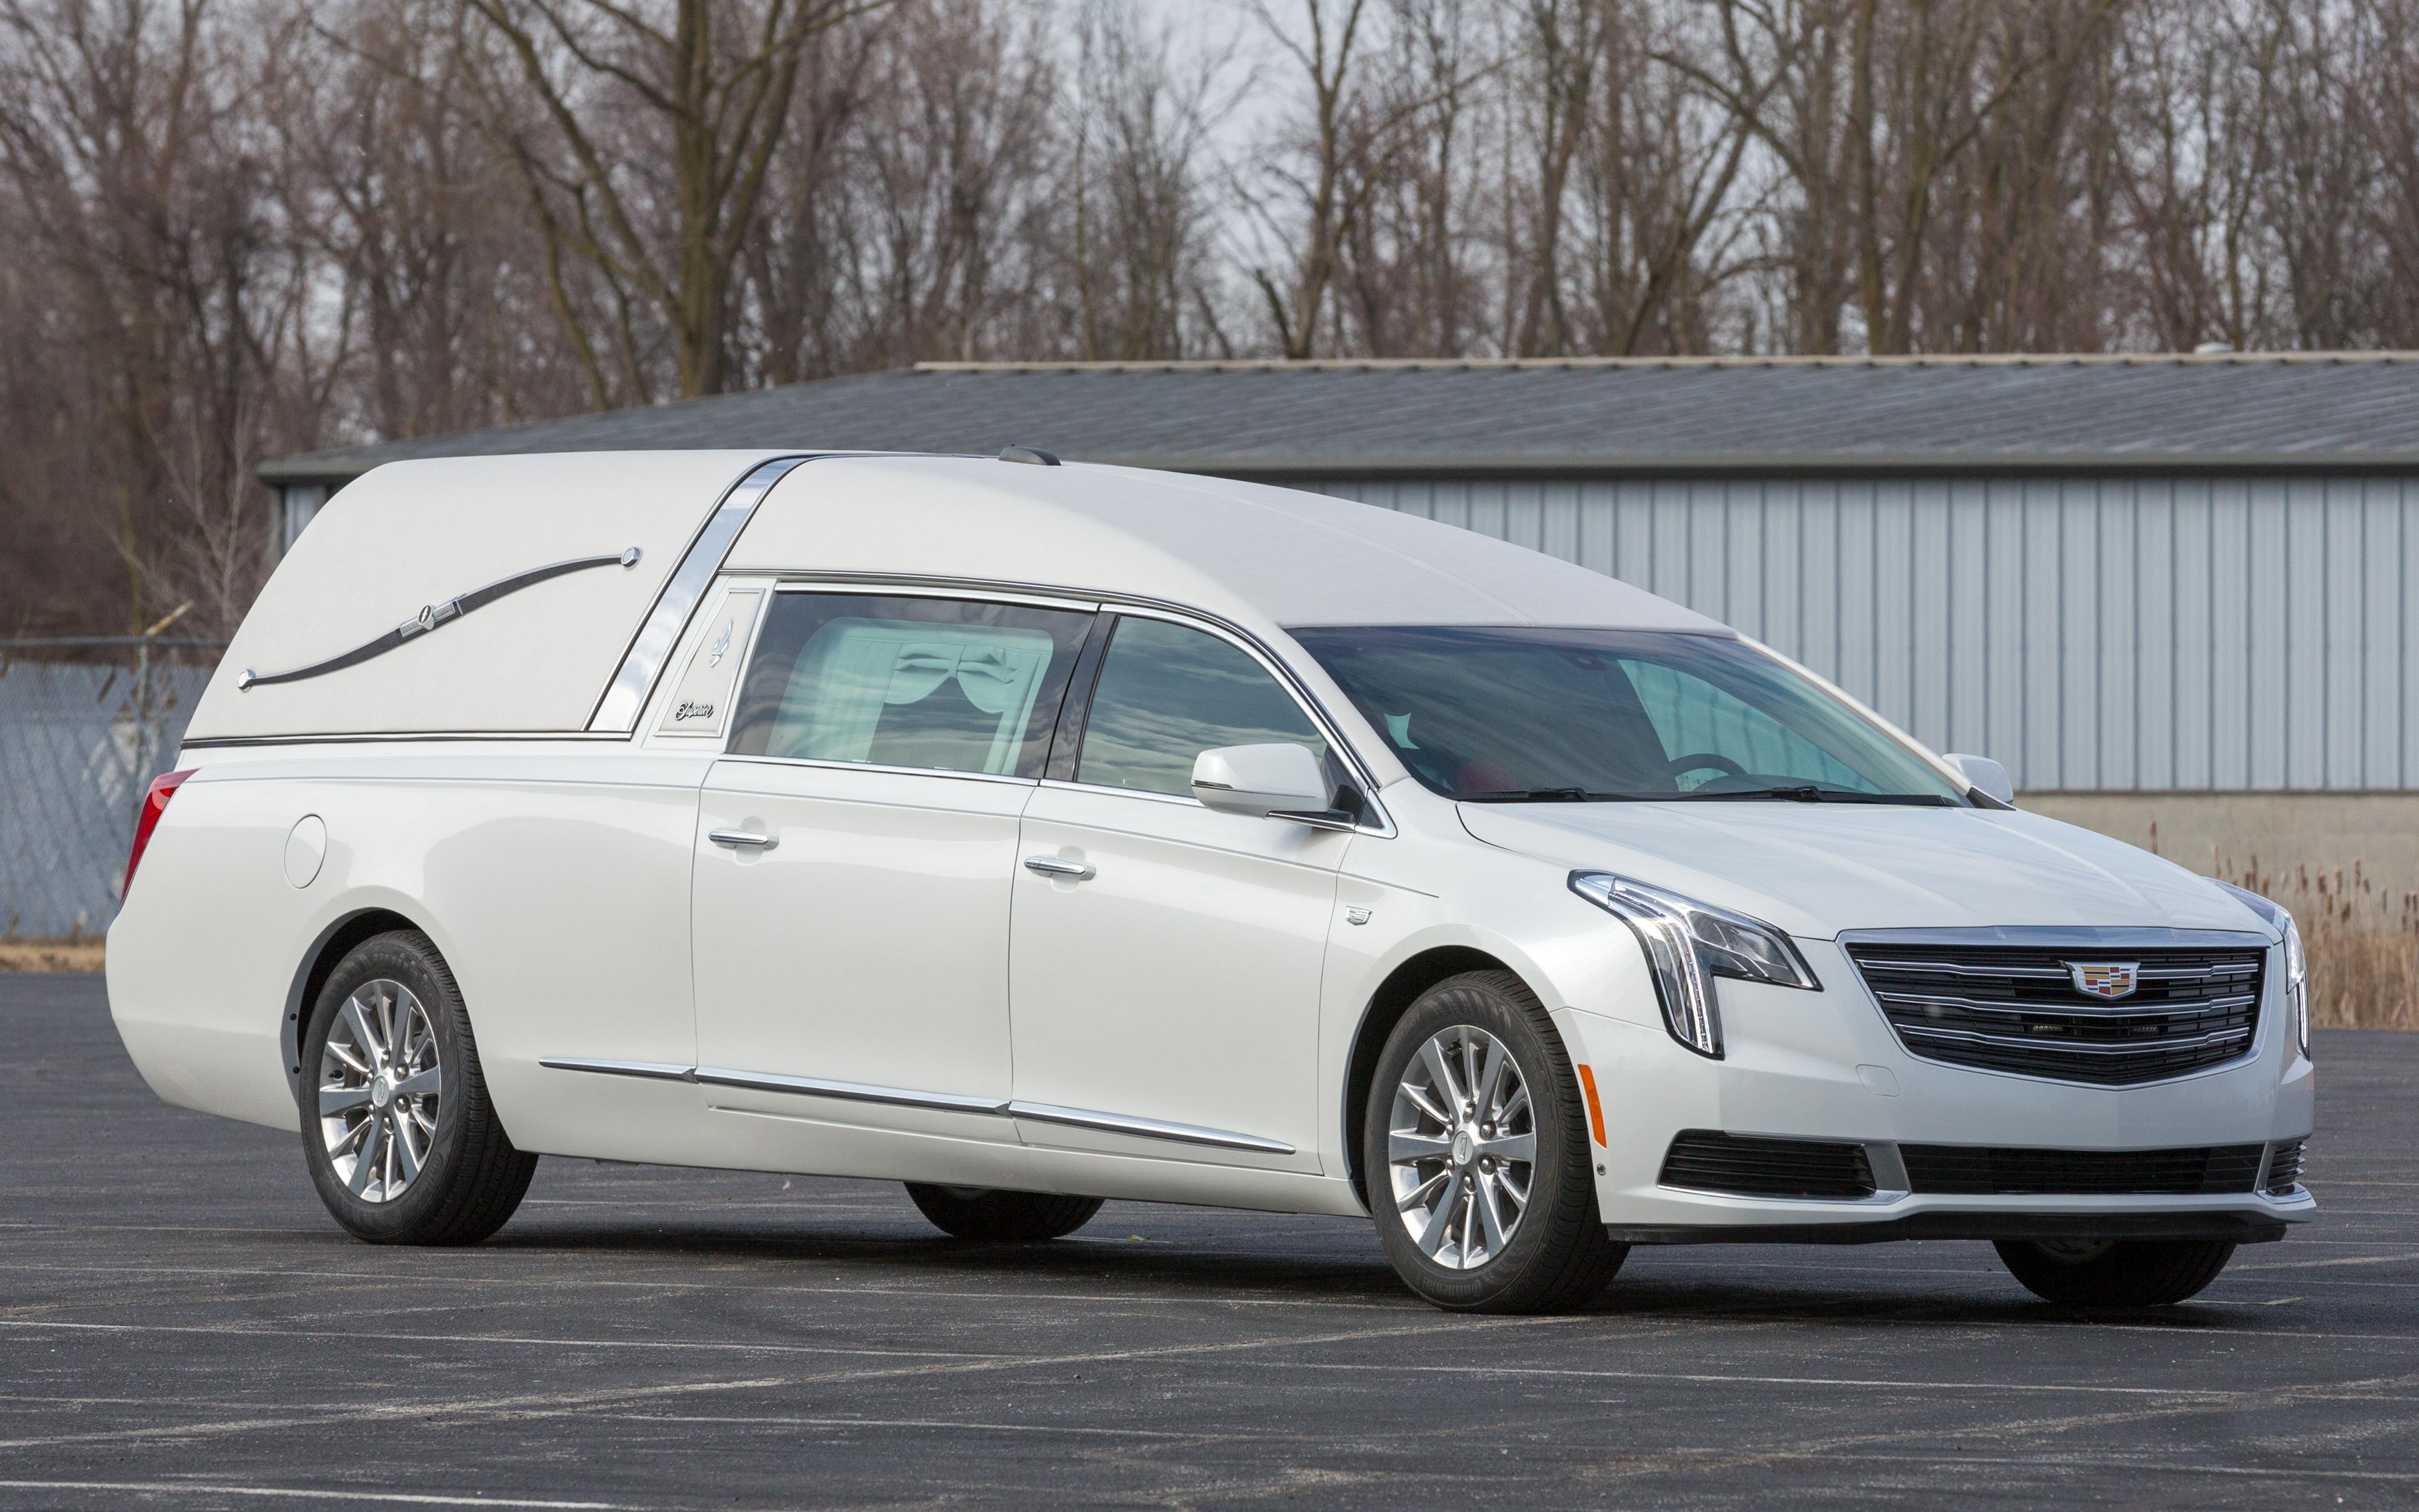 Cadillac XTS hd specifications